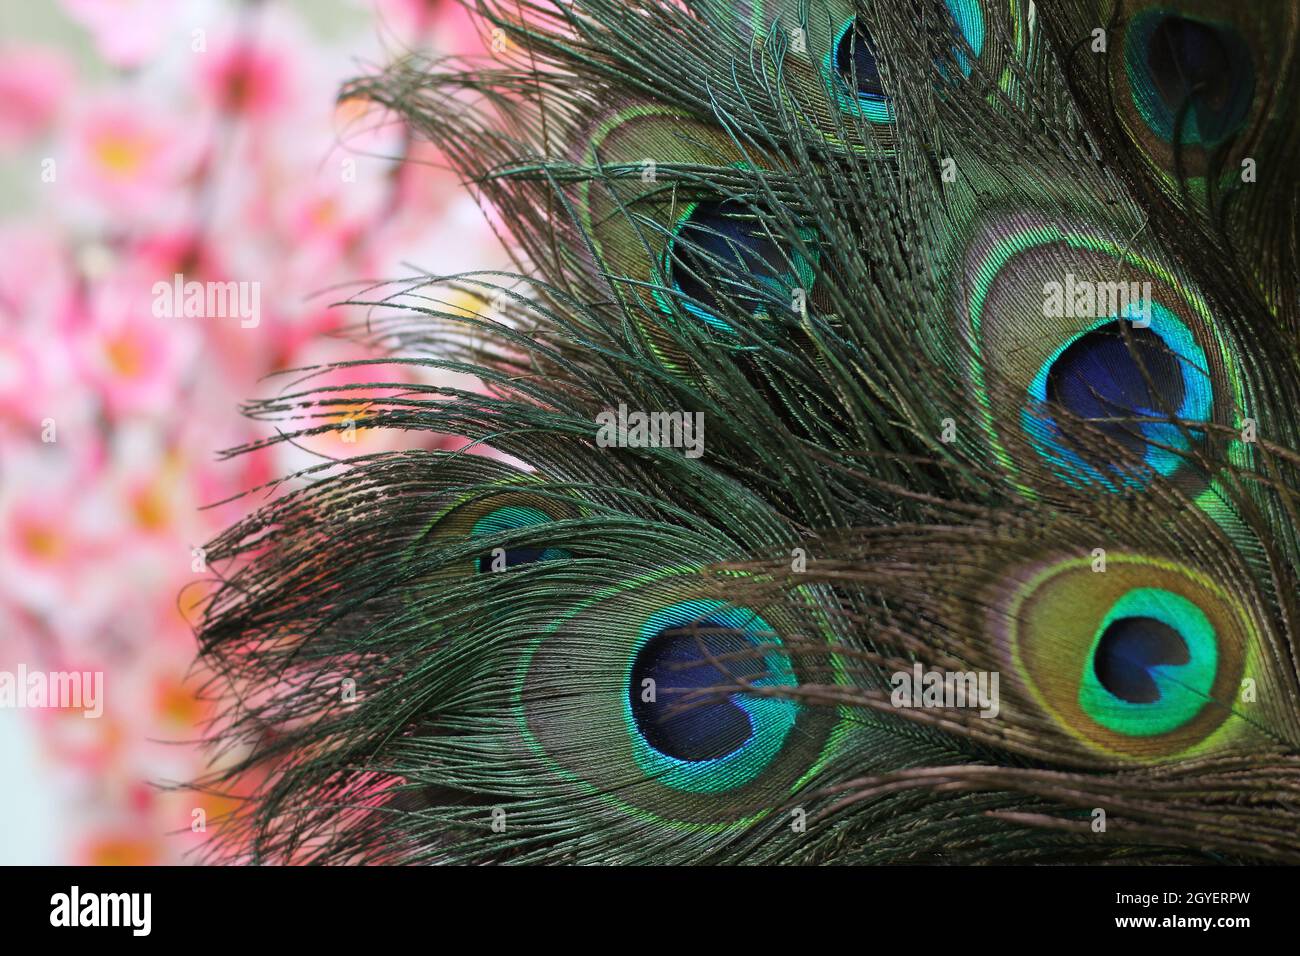 Peacock Feathers With Pink Flowers Blurred in Background Stock Photo ...